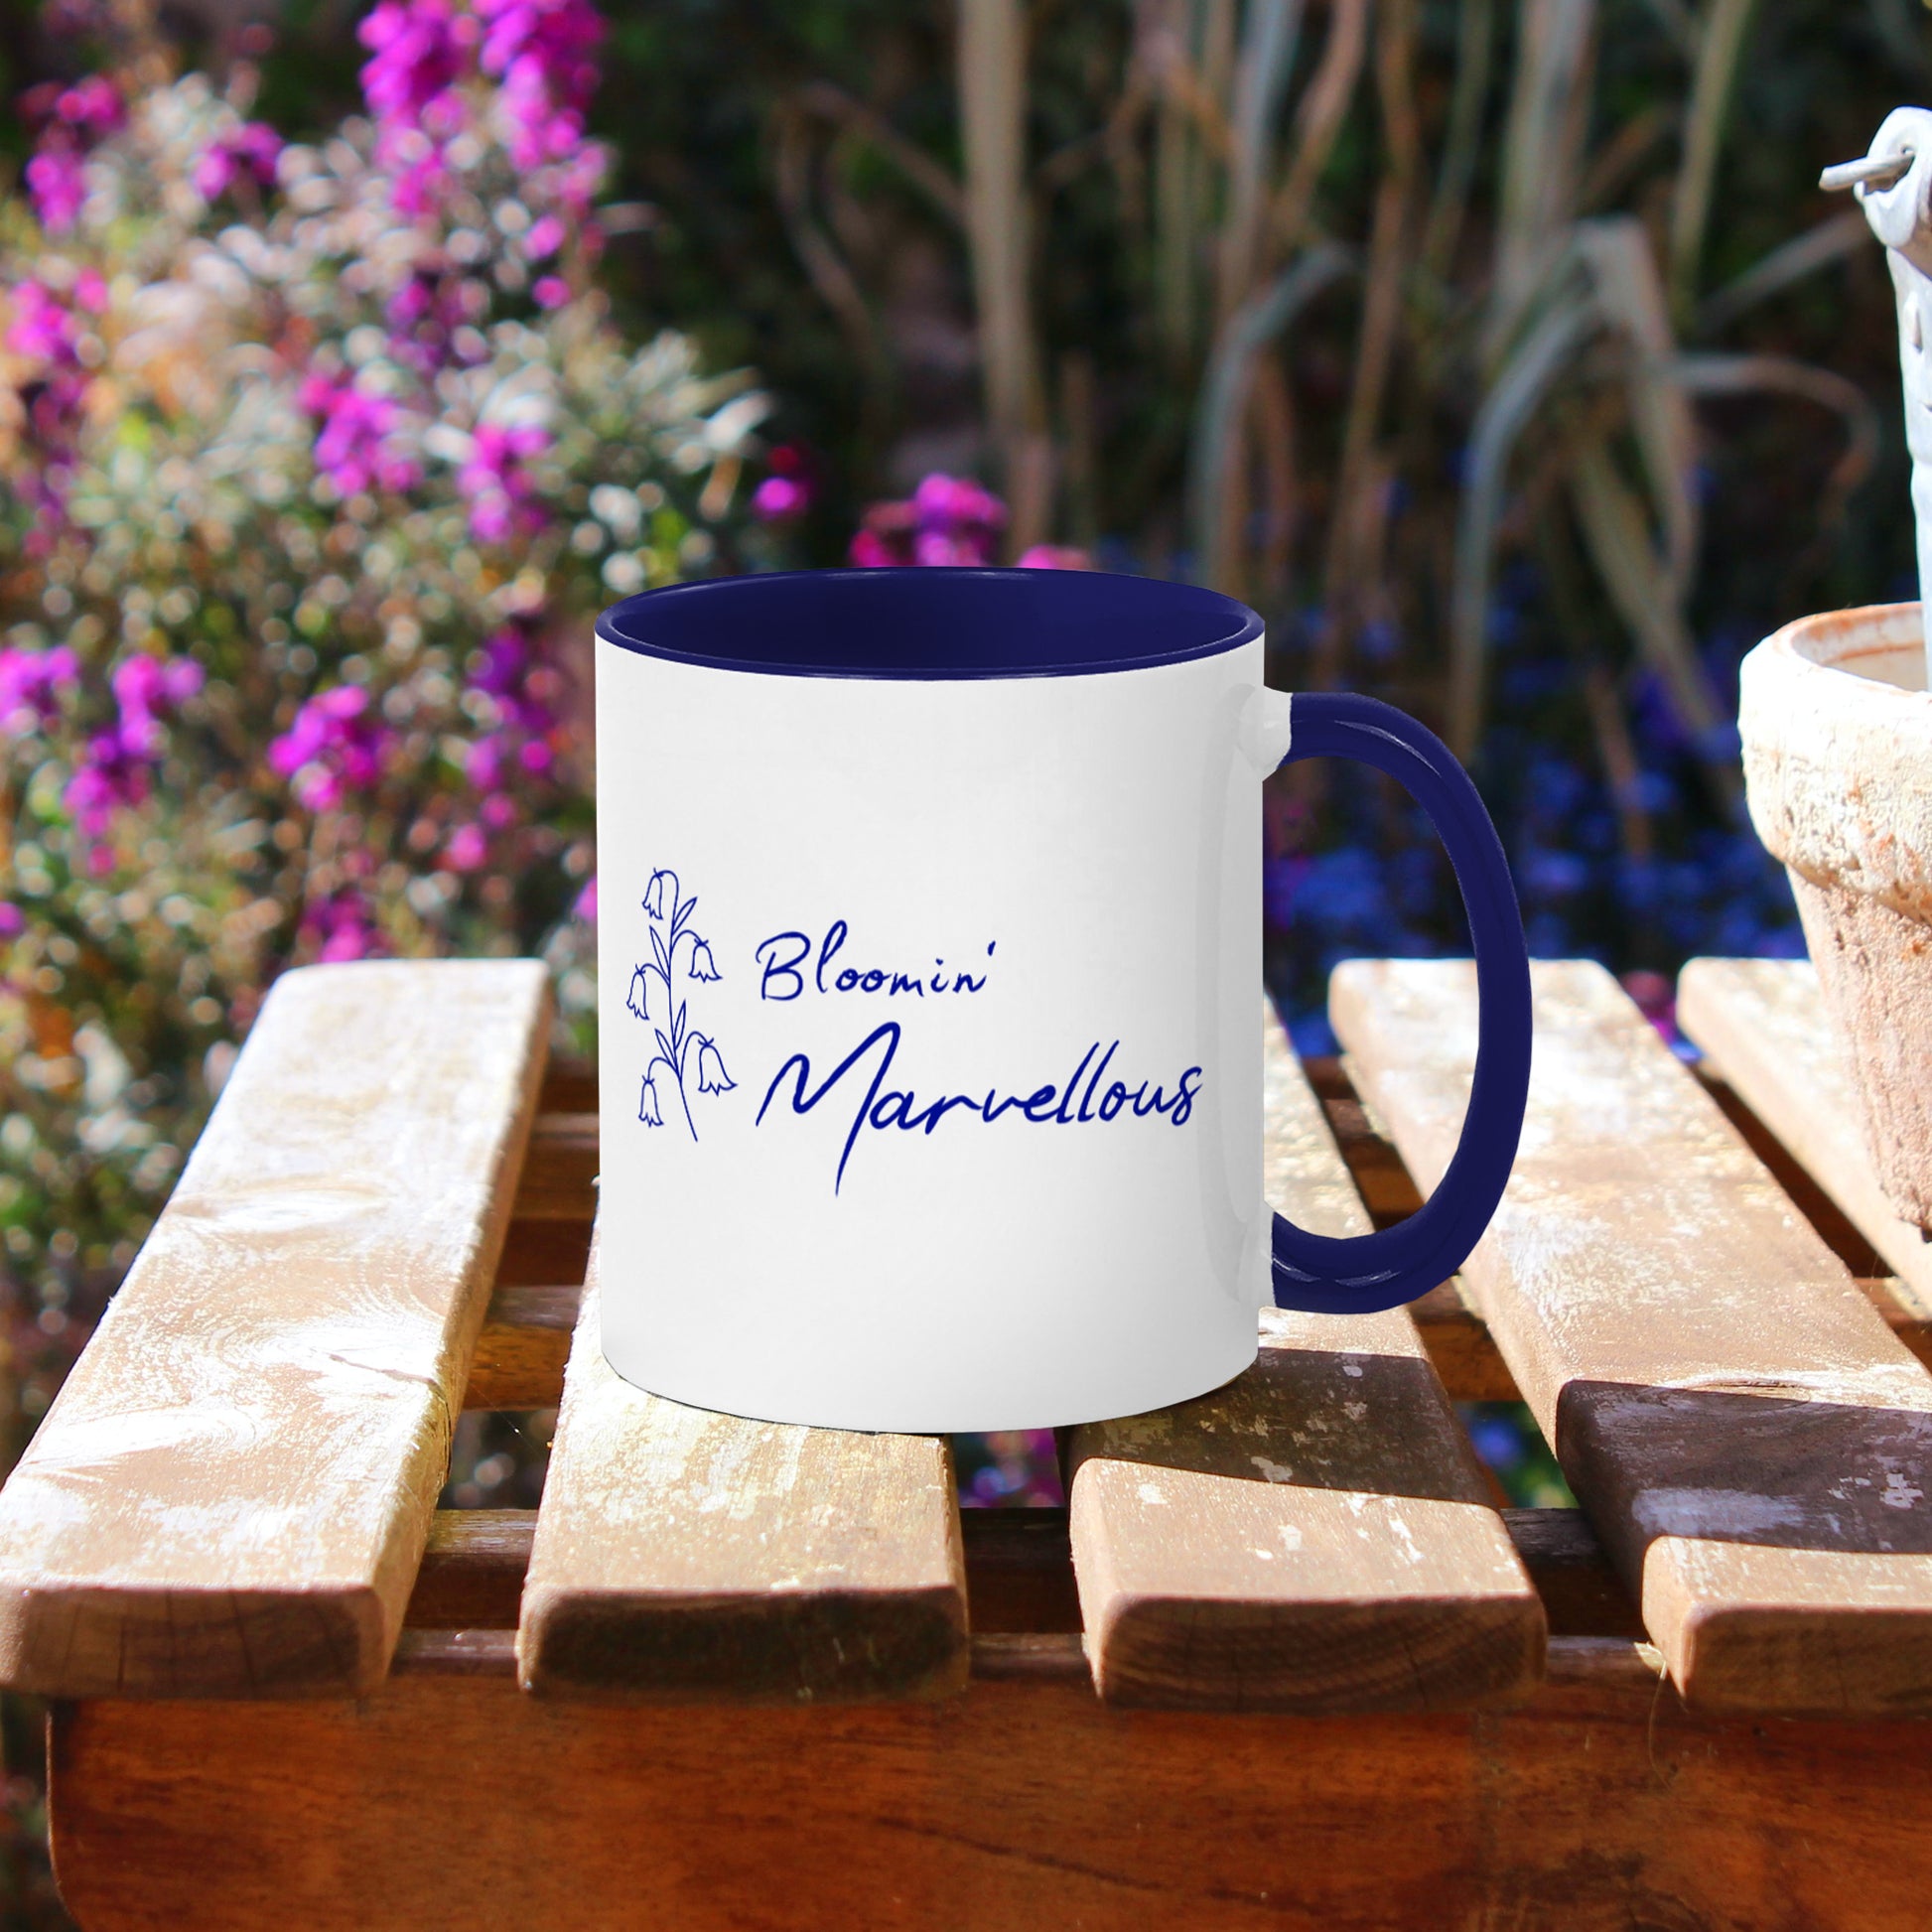 Garden plant theme mug. Personalised name optional, White ceramic 11oz coffee cup with navy blue handle and inner. Floral design navy blue bluebells outline and wording Bloomin Marvellous in script style font next to flowers. Without personalisation on this photo.